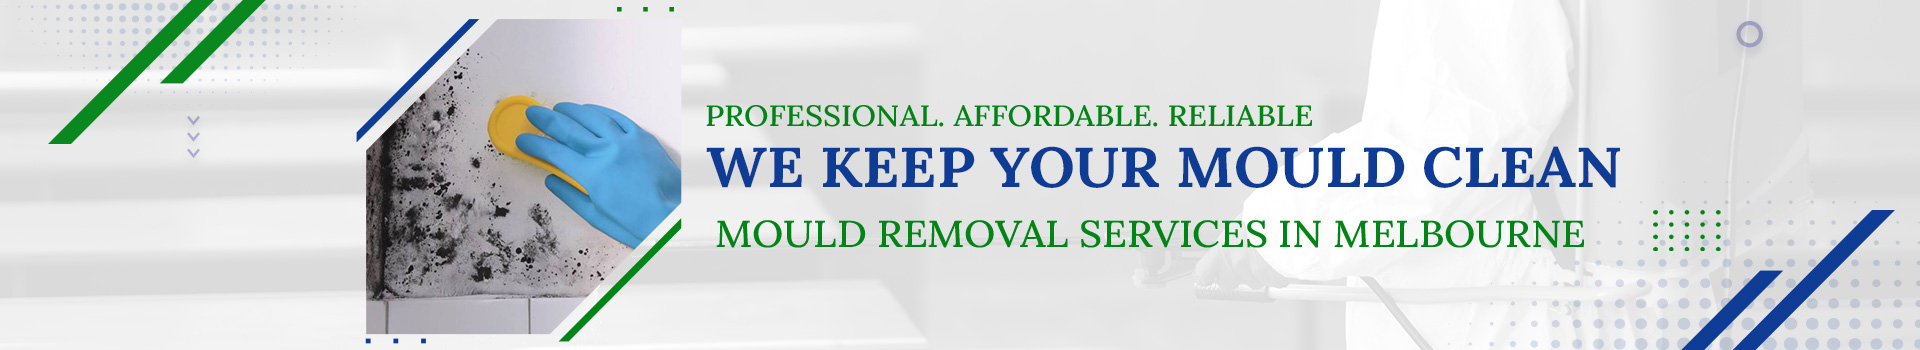 Mould Removal services in Melbourne